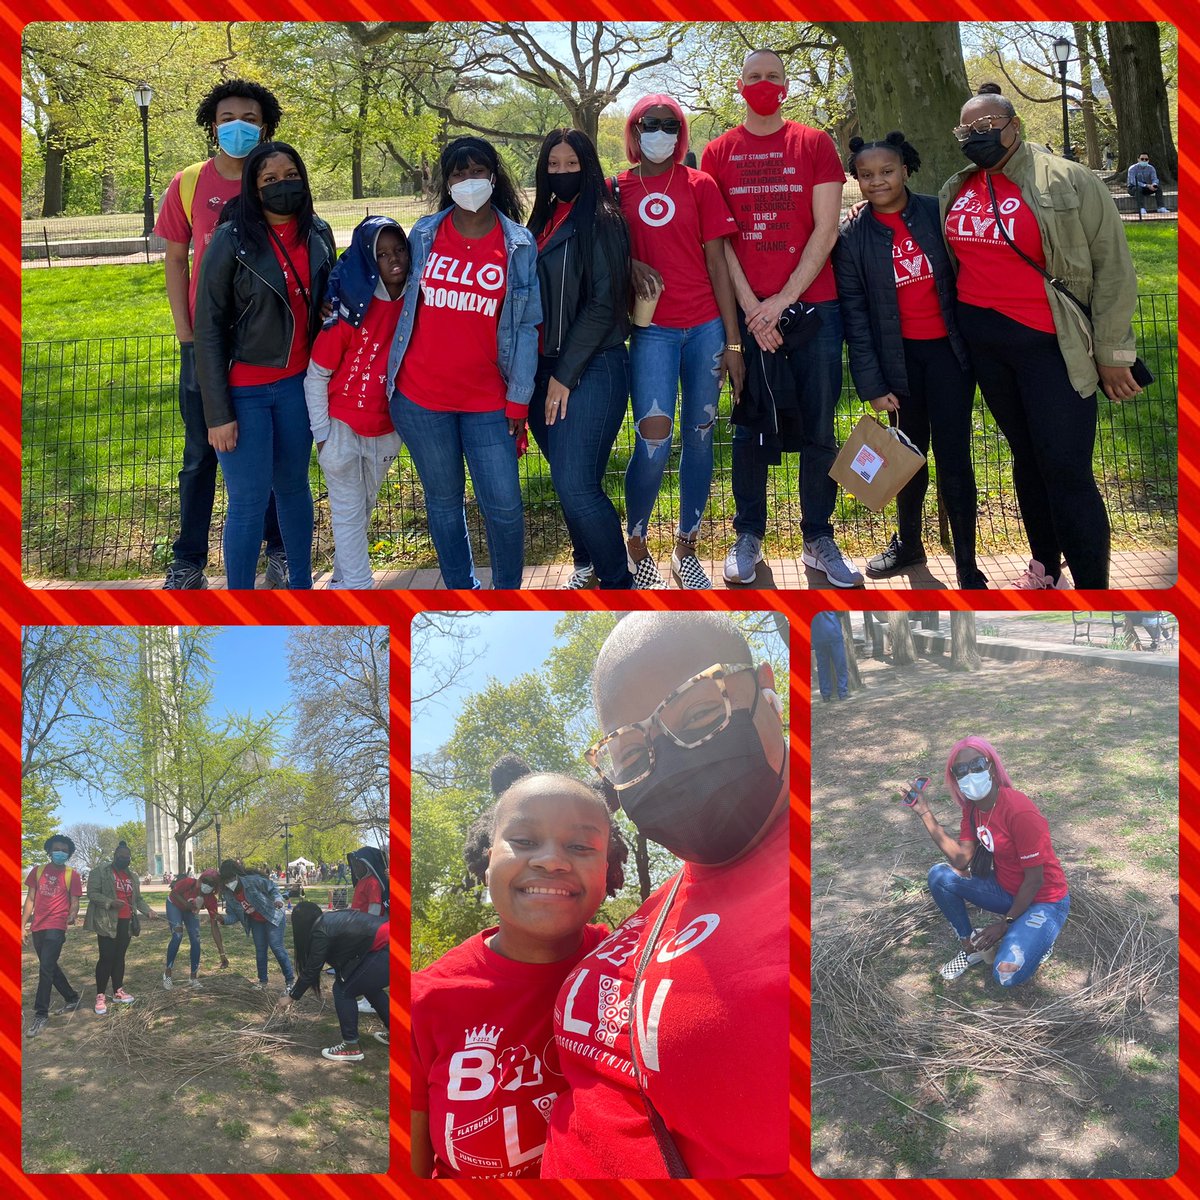 T1849 & T2212 volunteers at the @fortgreenepark Conservancy today. Had a blast dancing to African, Nigerian Music, & participating w/ @UrbanGlass on Ephemeral Landscapes art project. Not to mention creating nests. @jj_pineda_ @Thereal_Sdyba @CooleyMalaika @BarksdaleMegan